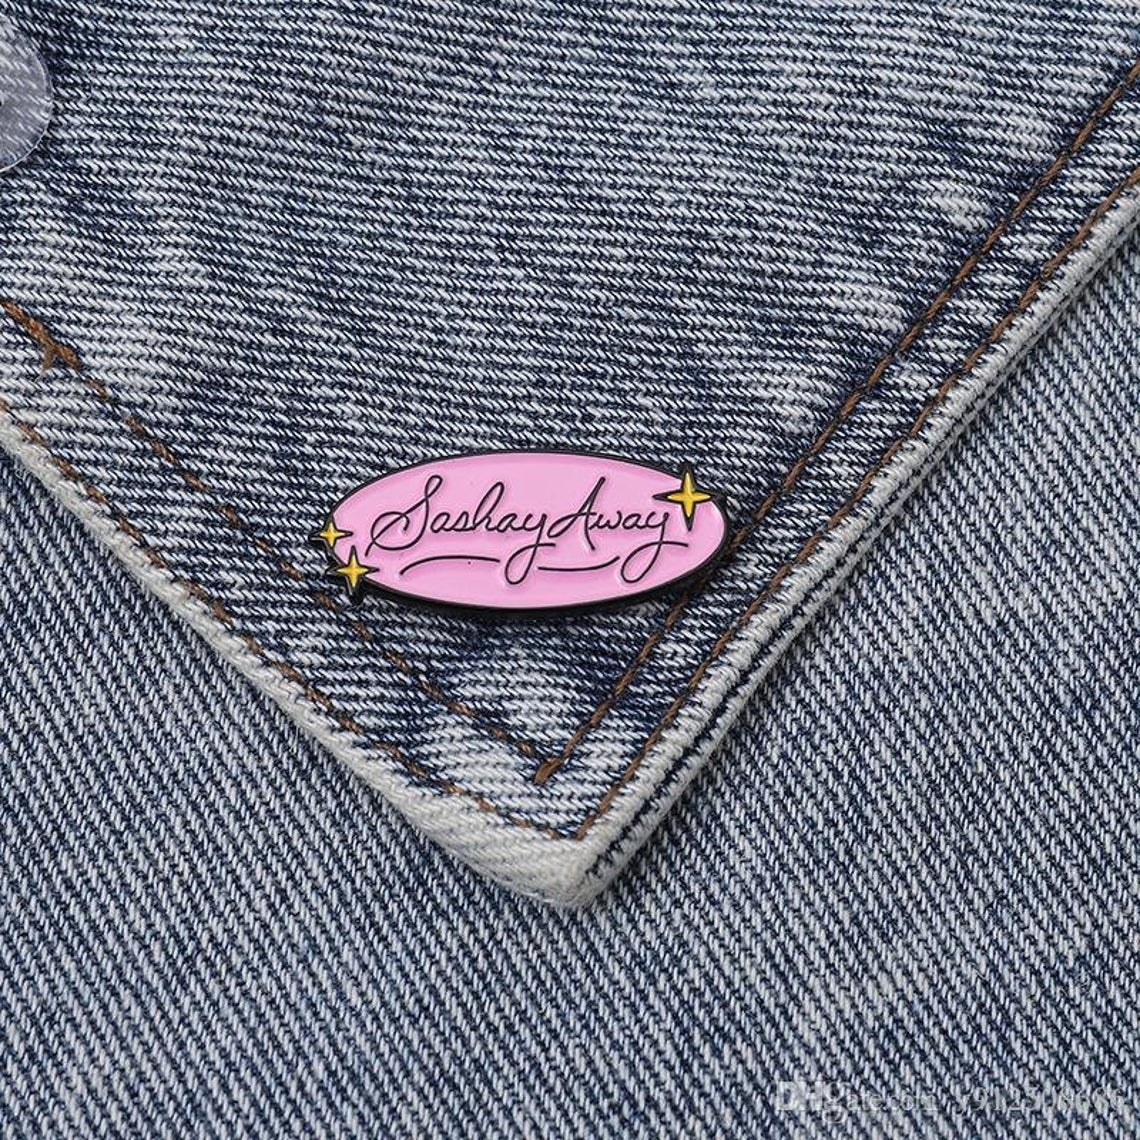 The pin on a jean jacket